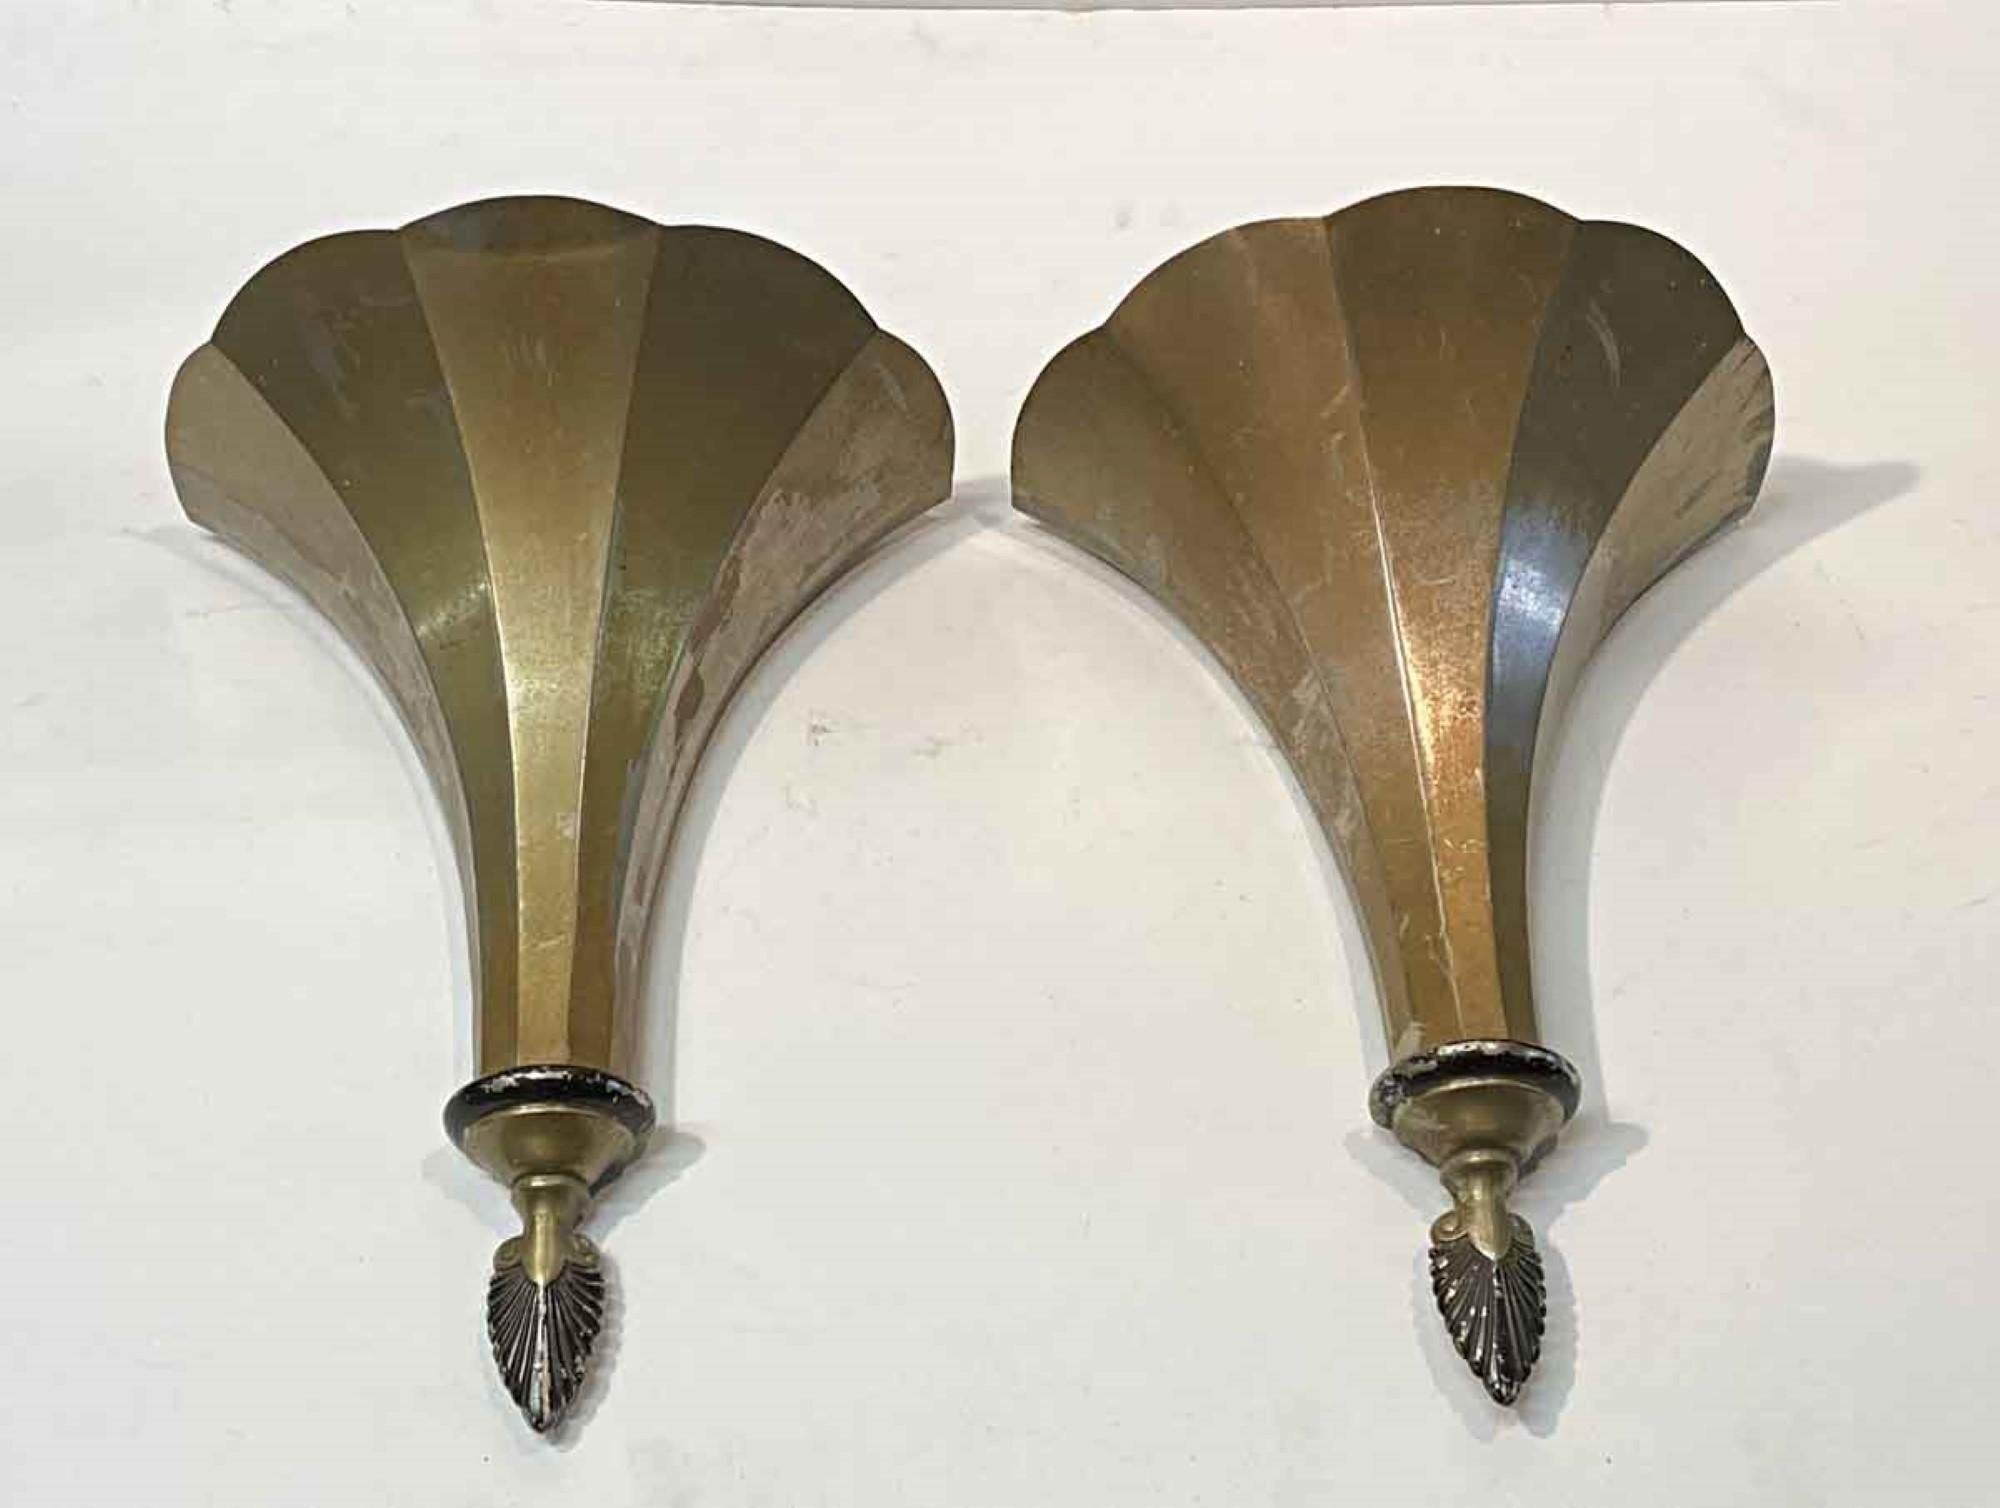 1920s pair of original painted finish French theater torche brass wall sconces. Slight bend in one of the flutes as can be seen in the photo. Priced as a pair. This can be seen at our 400 Gilligan St location in Scranton. PA.